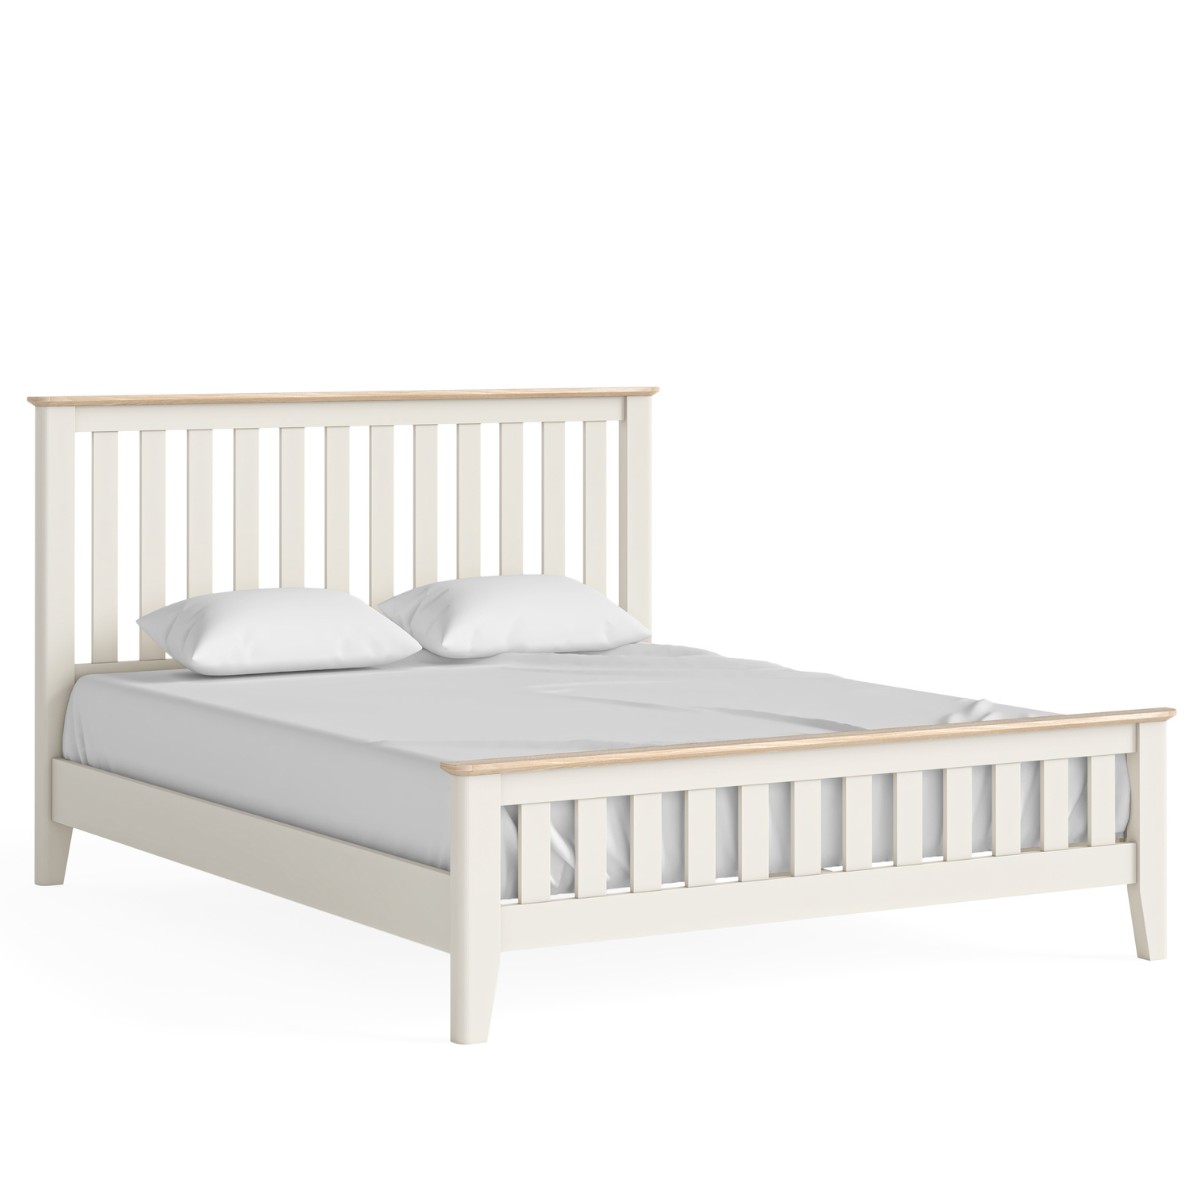 Marcella white Slatted Bed - 1